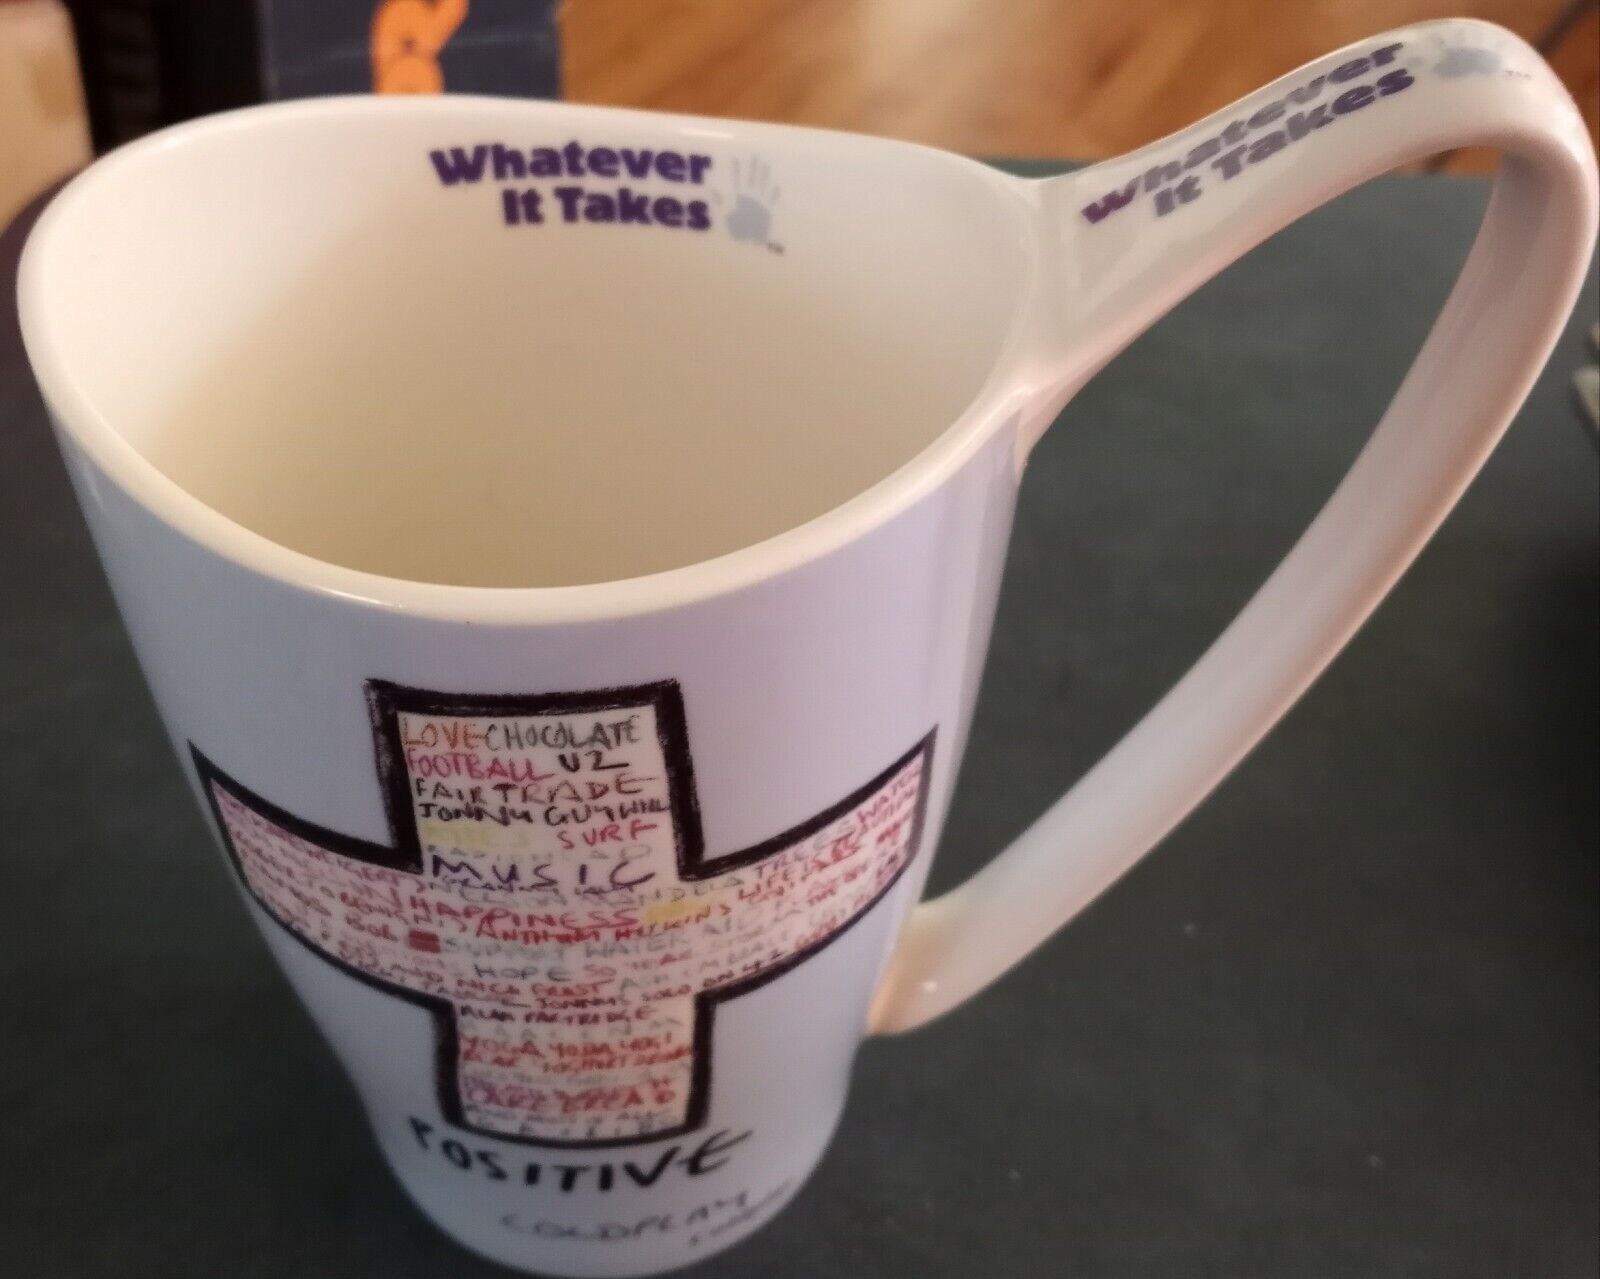 Coldplay Positive Whatever It Takes Coffee Mug - Mint Condition